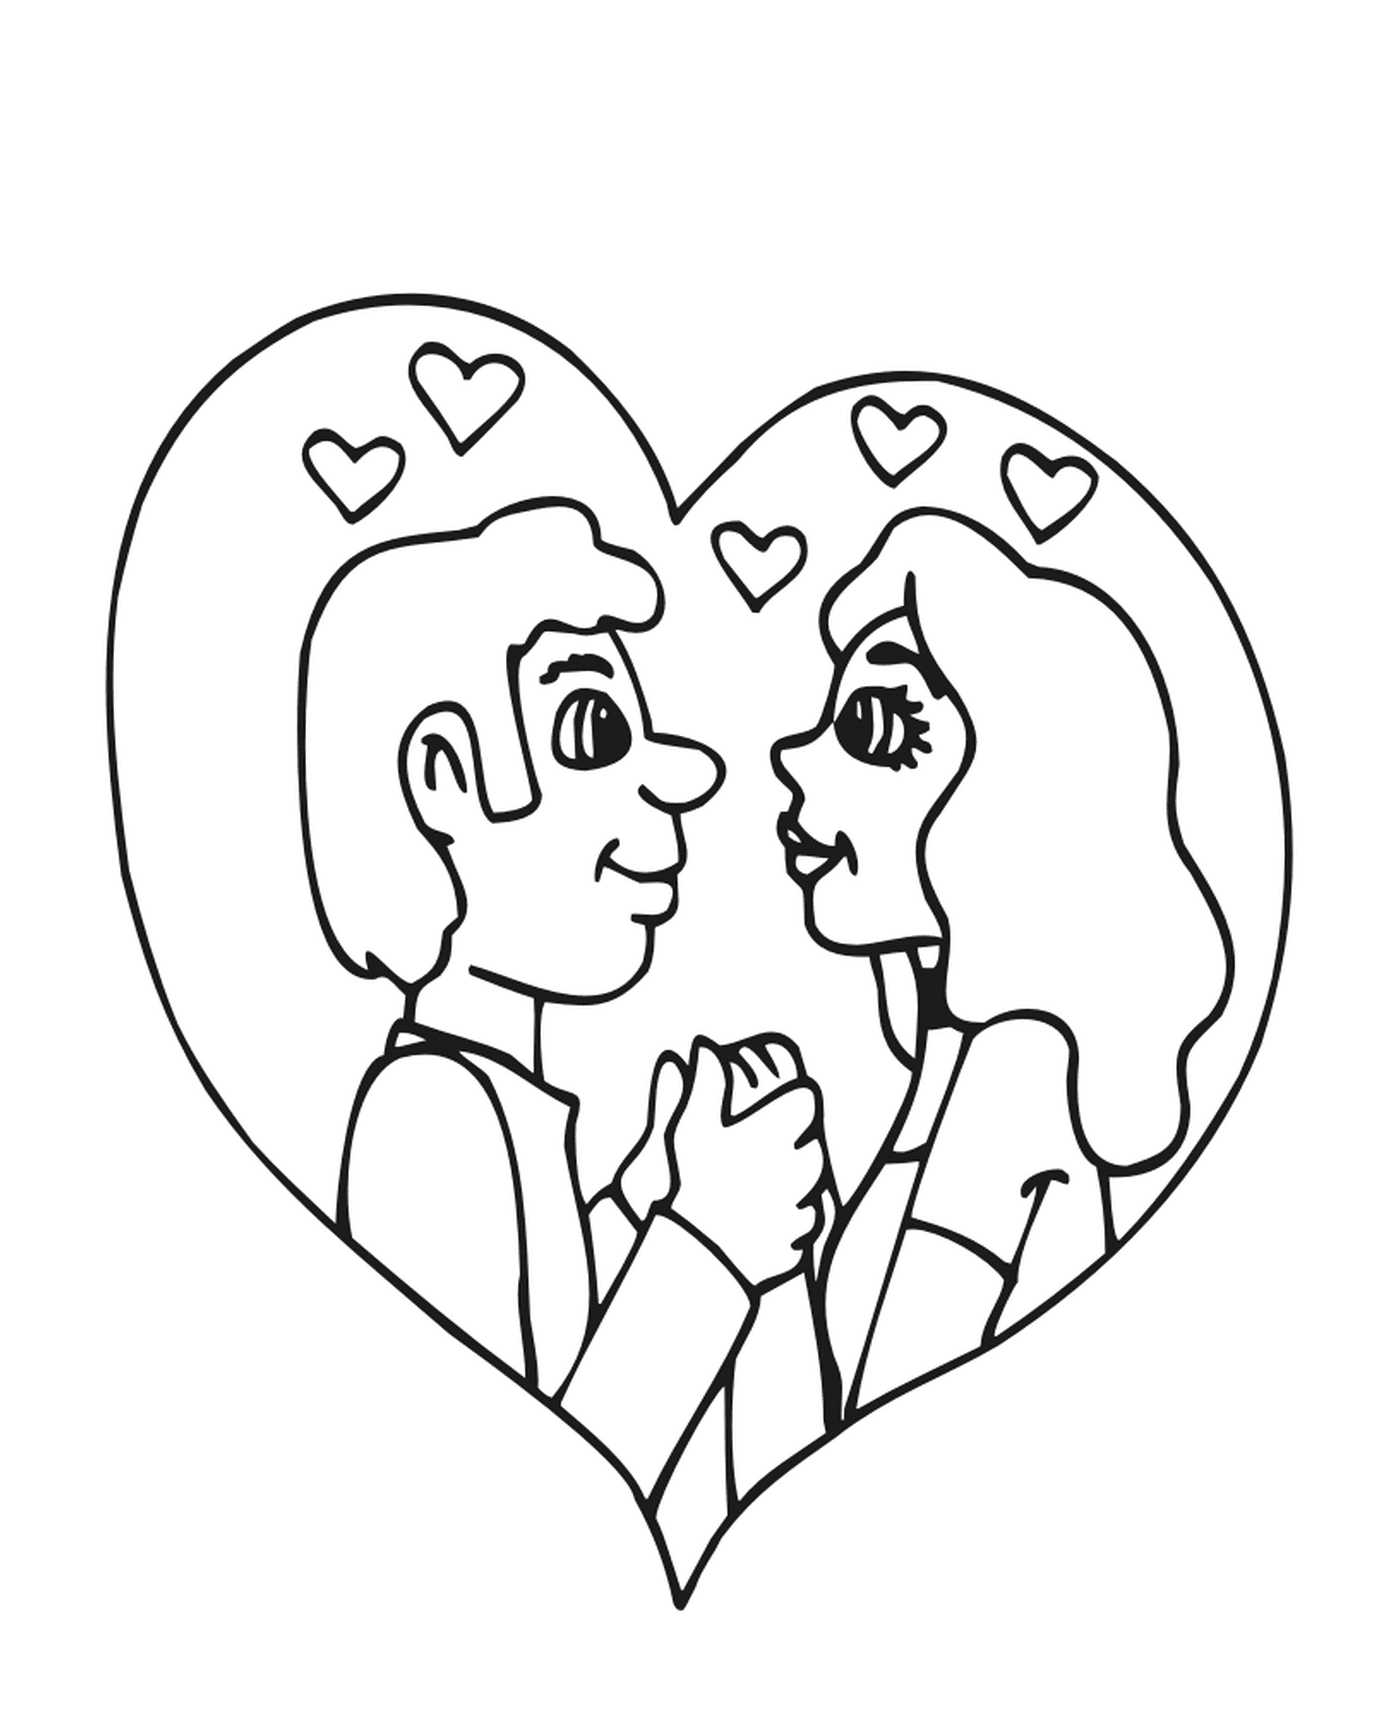  Two people holding hands in a heart 